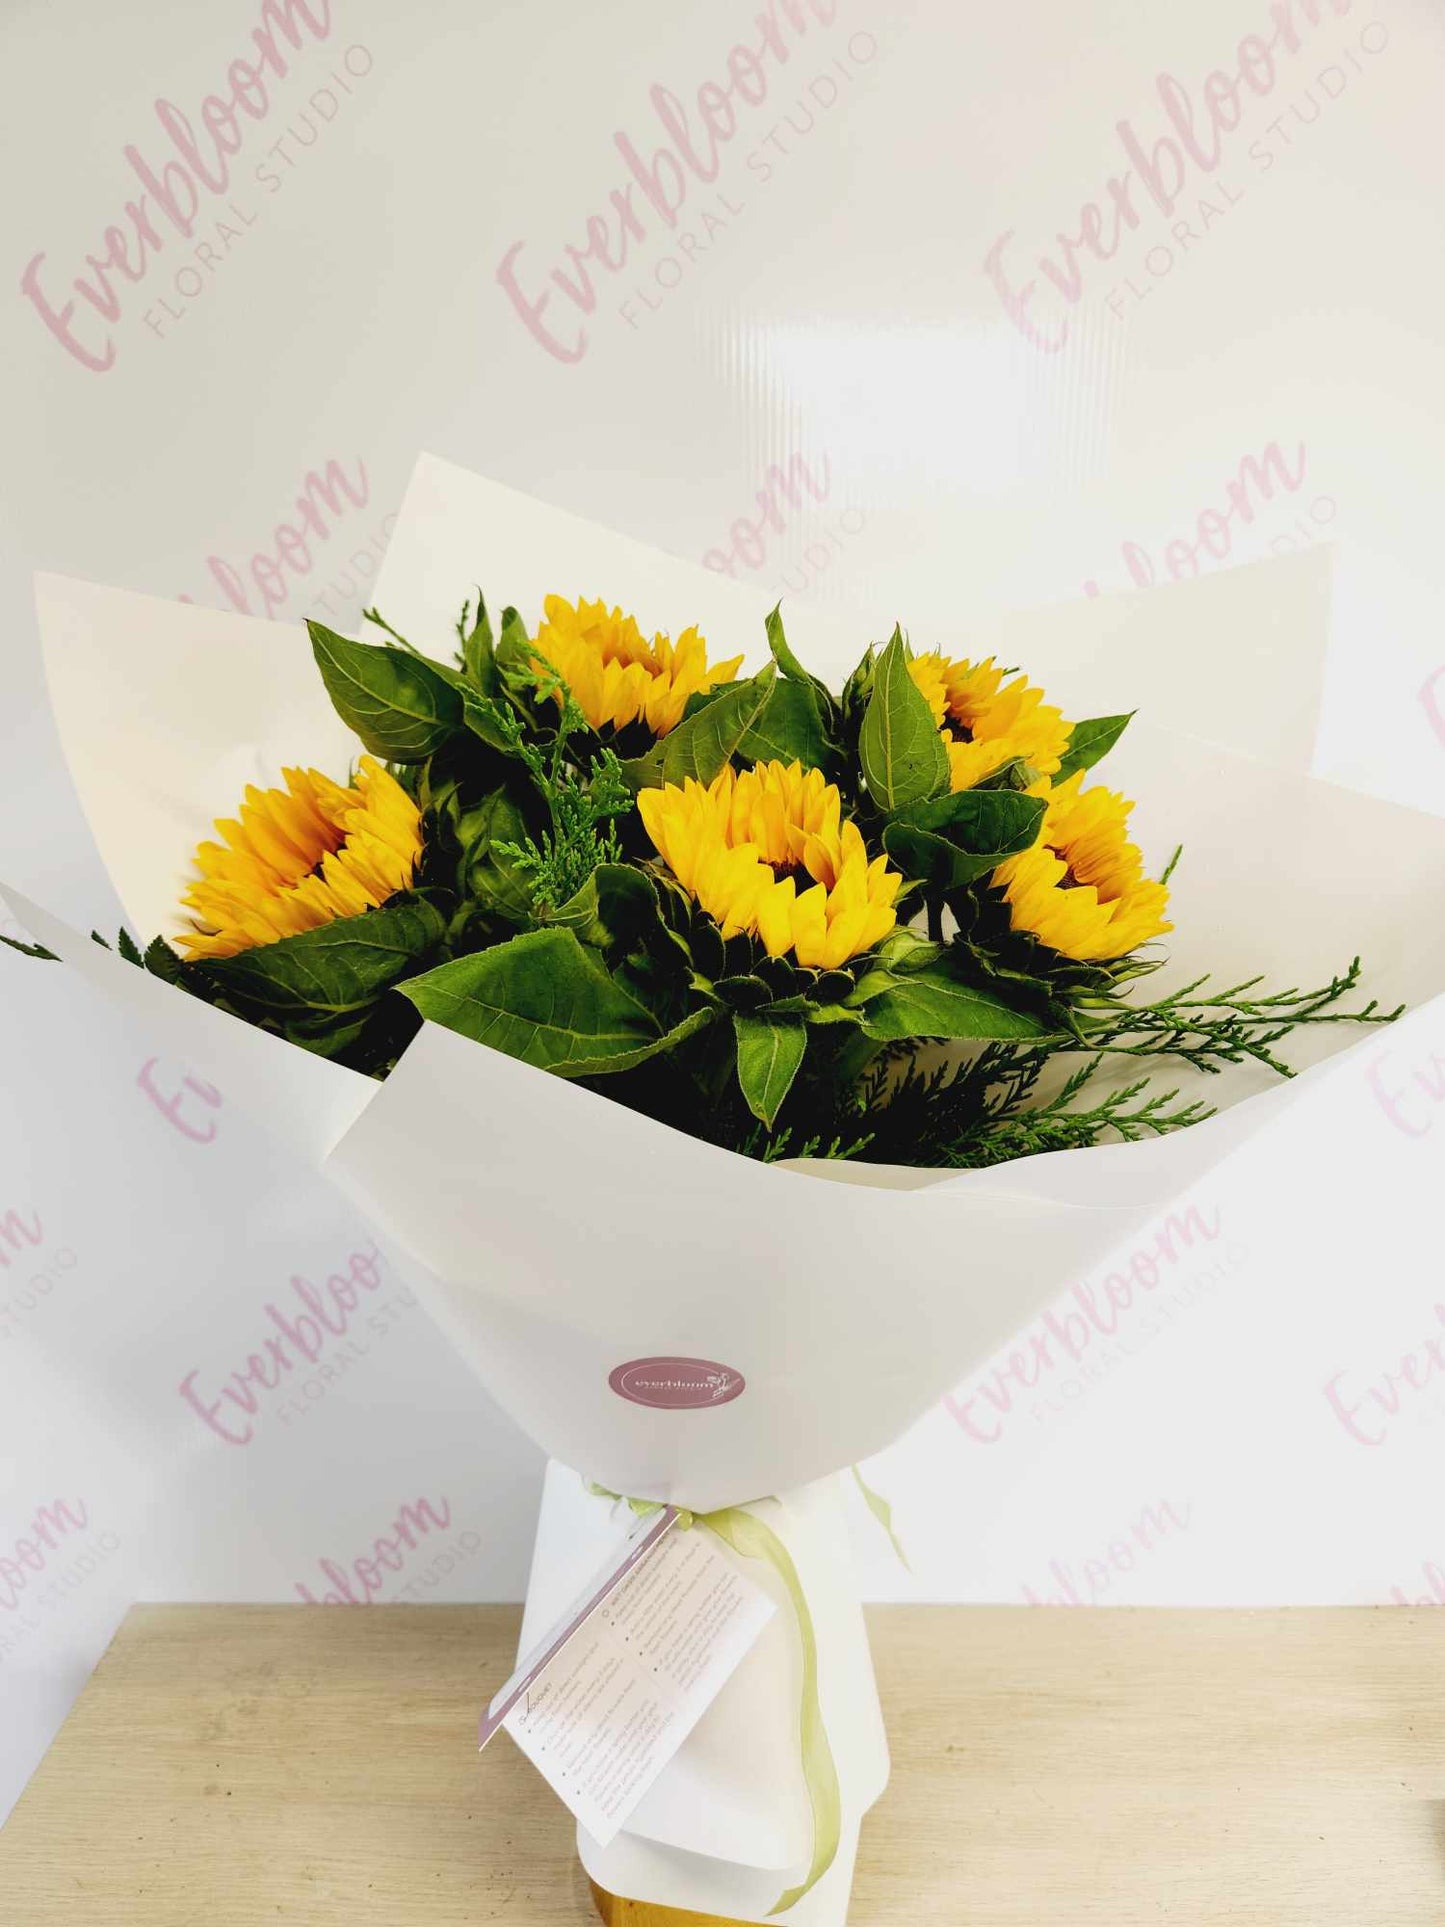 A happy bouquets of sunflowers, this bunch with bring happiness and a bit of sunshine to anyone's day. Send a bouquets of sunflowers today to that someone special in your life. Same day flower delivery from our everbloom floral studio in the sunny Mount Maunganui